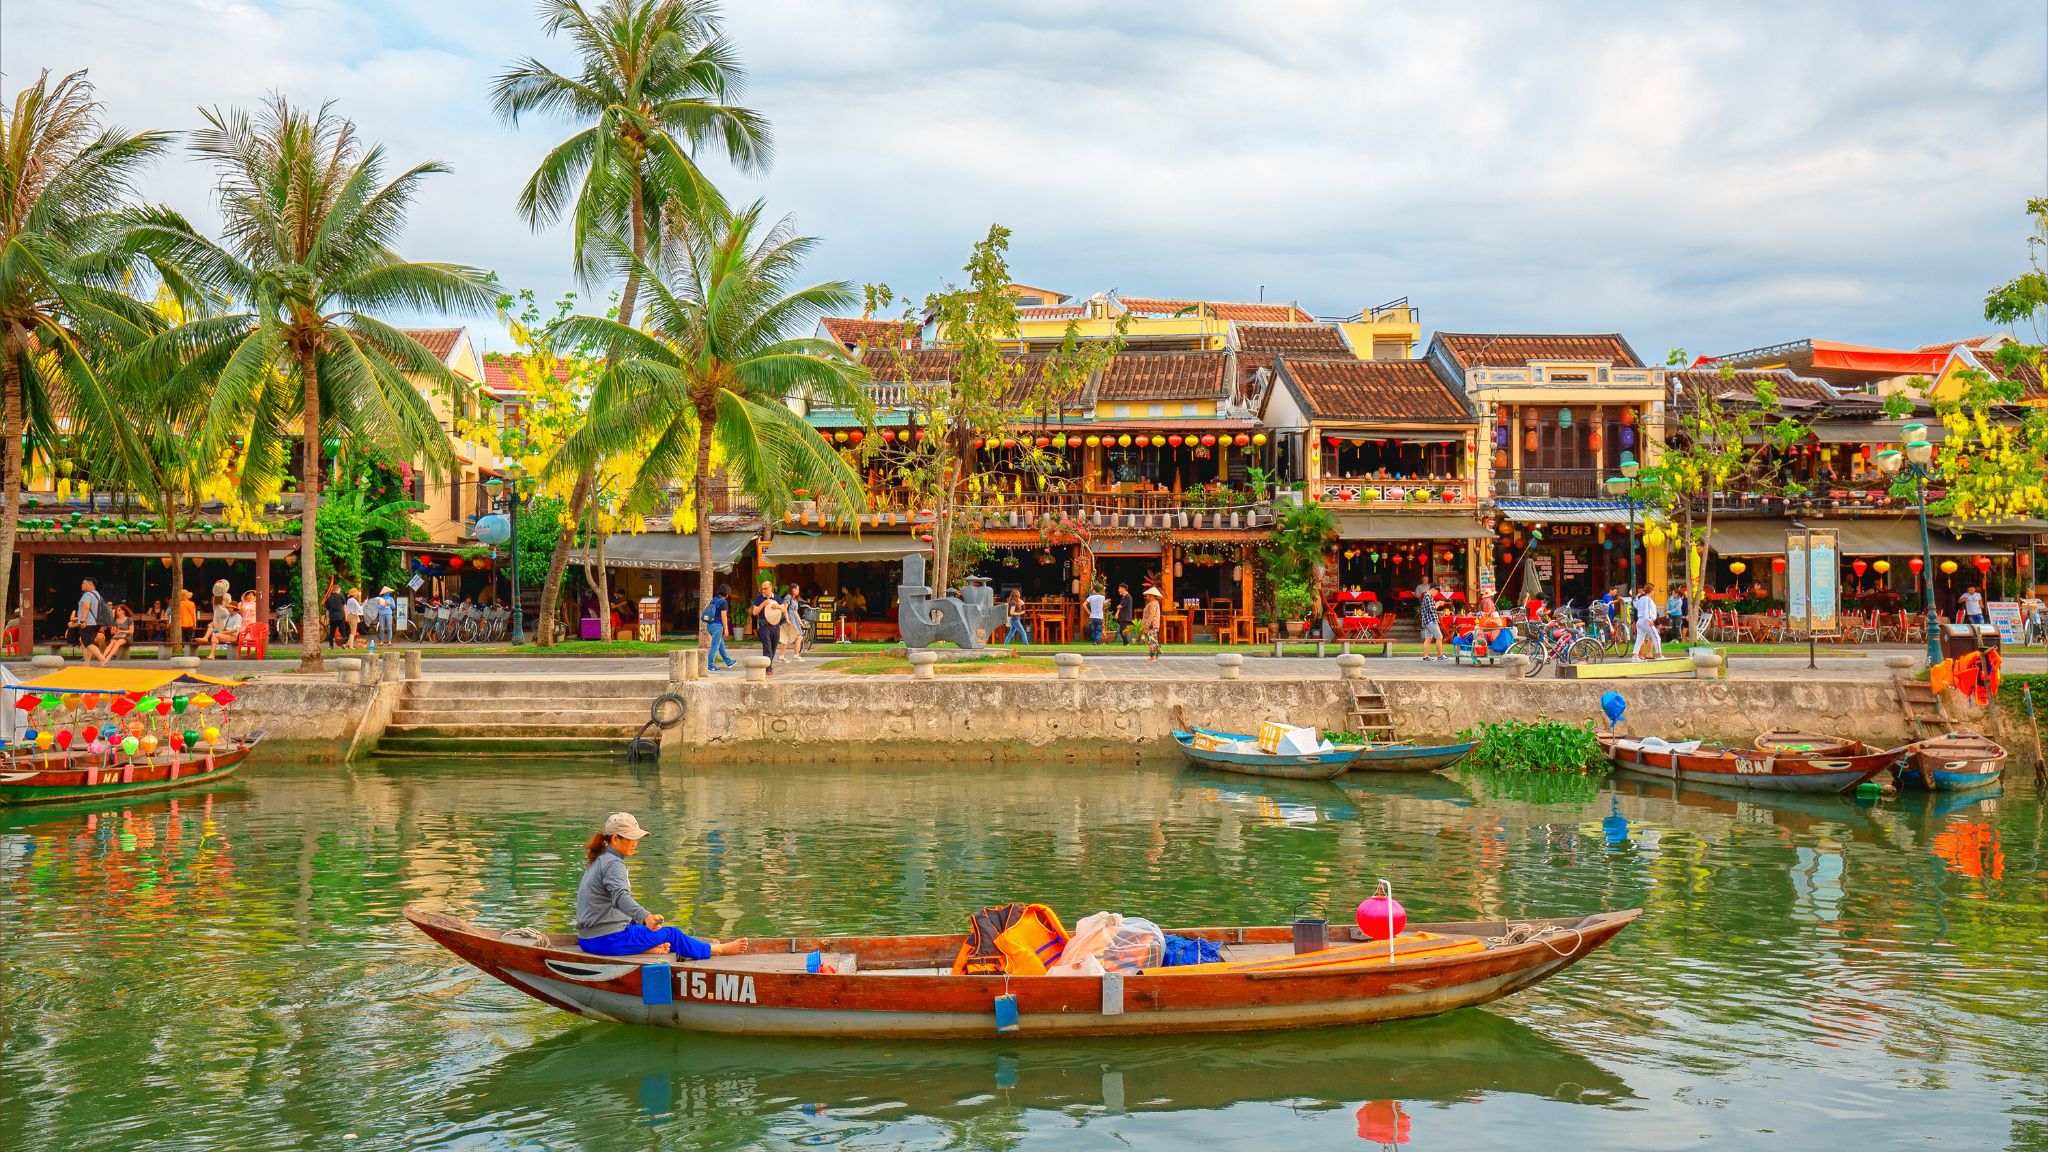 Day 5 6 Feel Free To Explore The Hidden Gems Of Hoi An